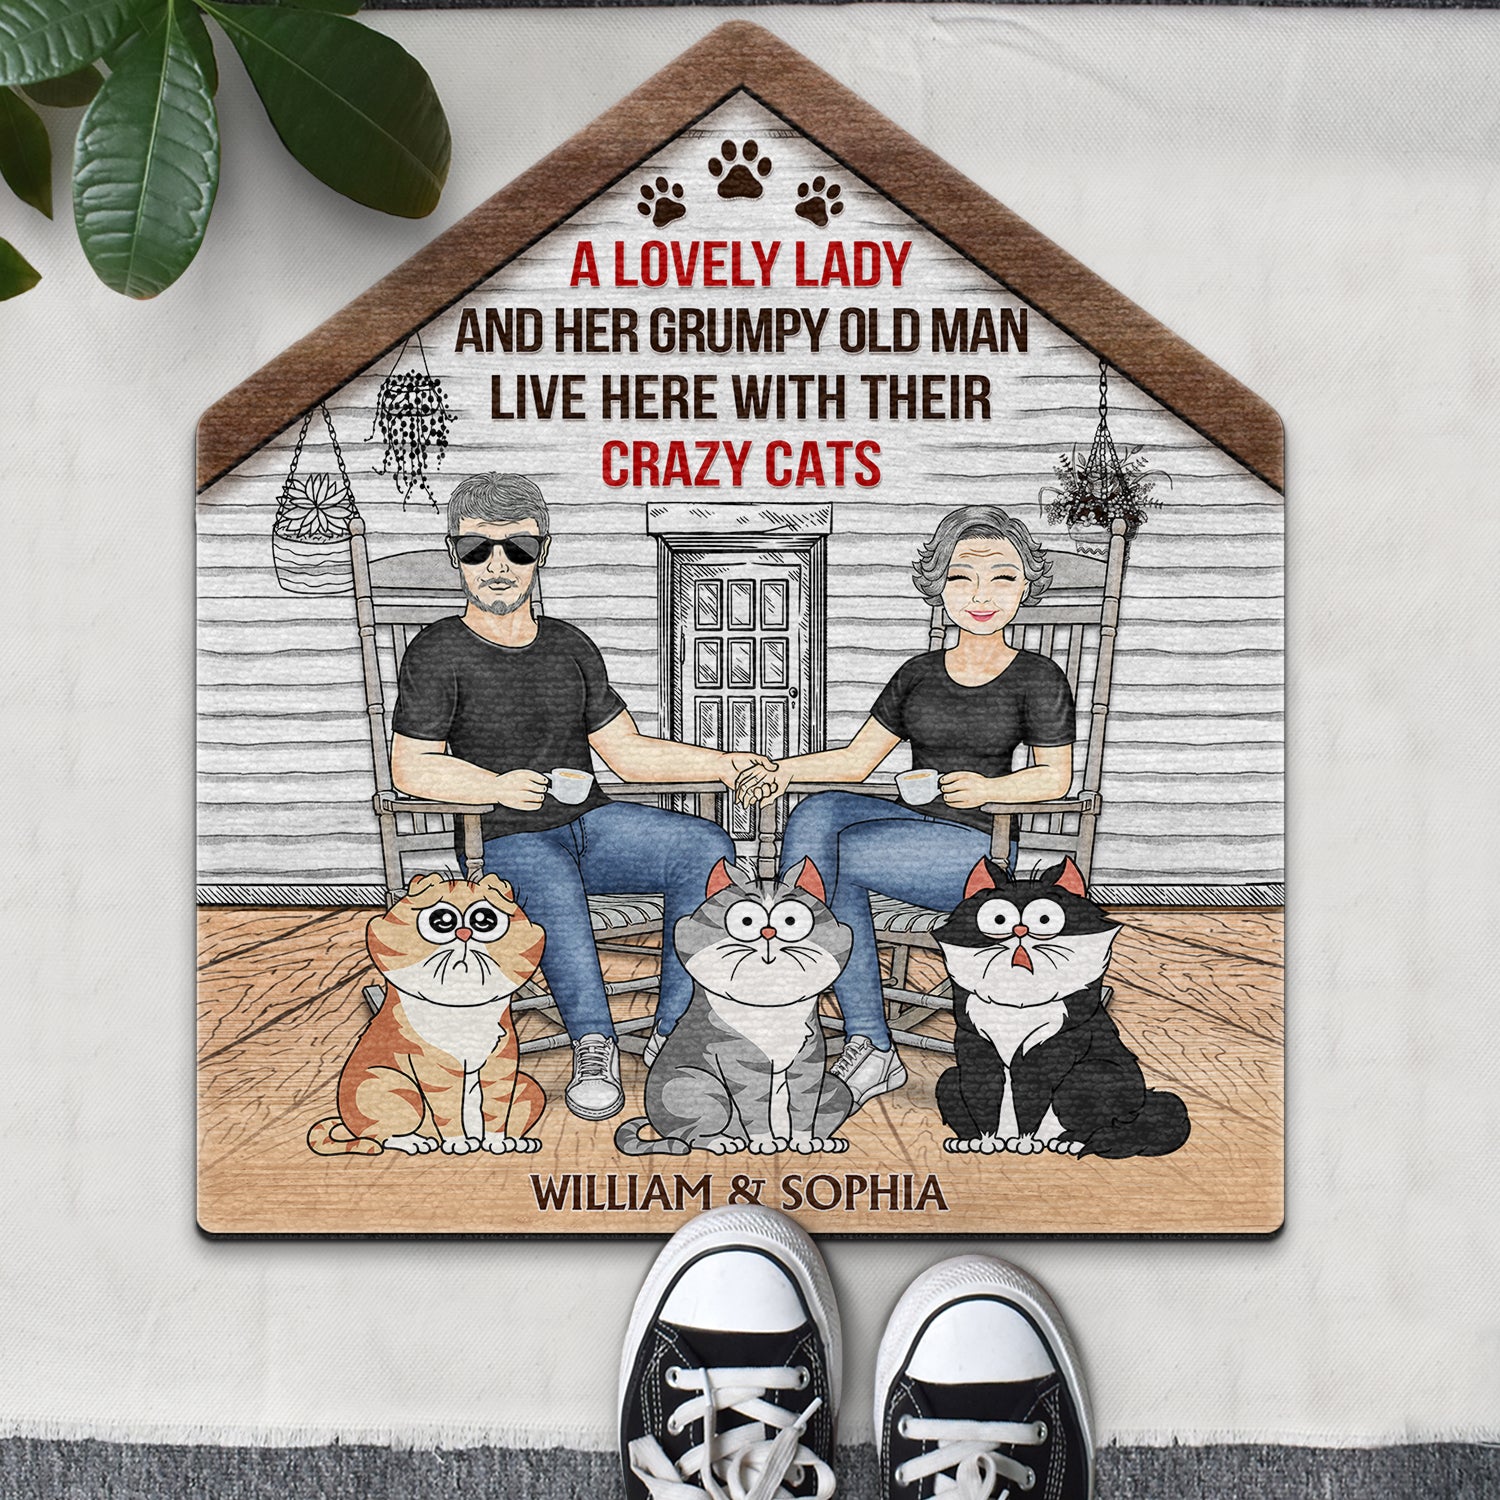 A Lovely Lady And Her Grumpy Old Man Live Here With Their Crazy Cats - Gift For Couples, Pet Lovers And Family - Personalized Custom Shaped Doormat